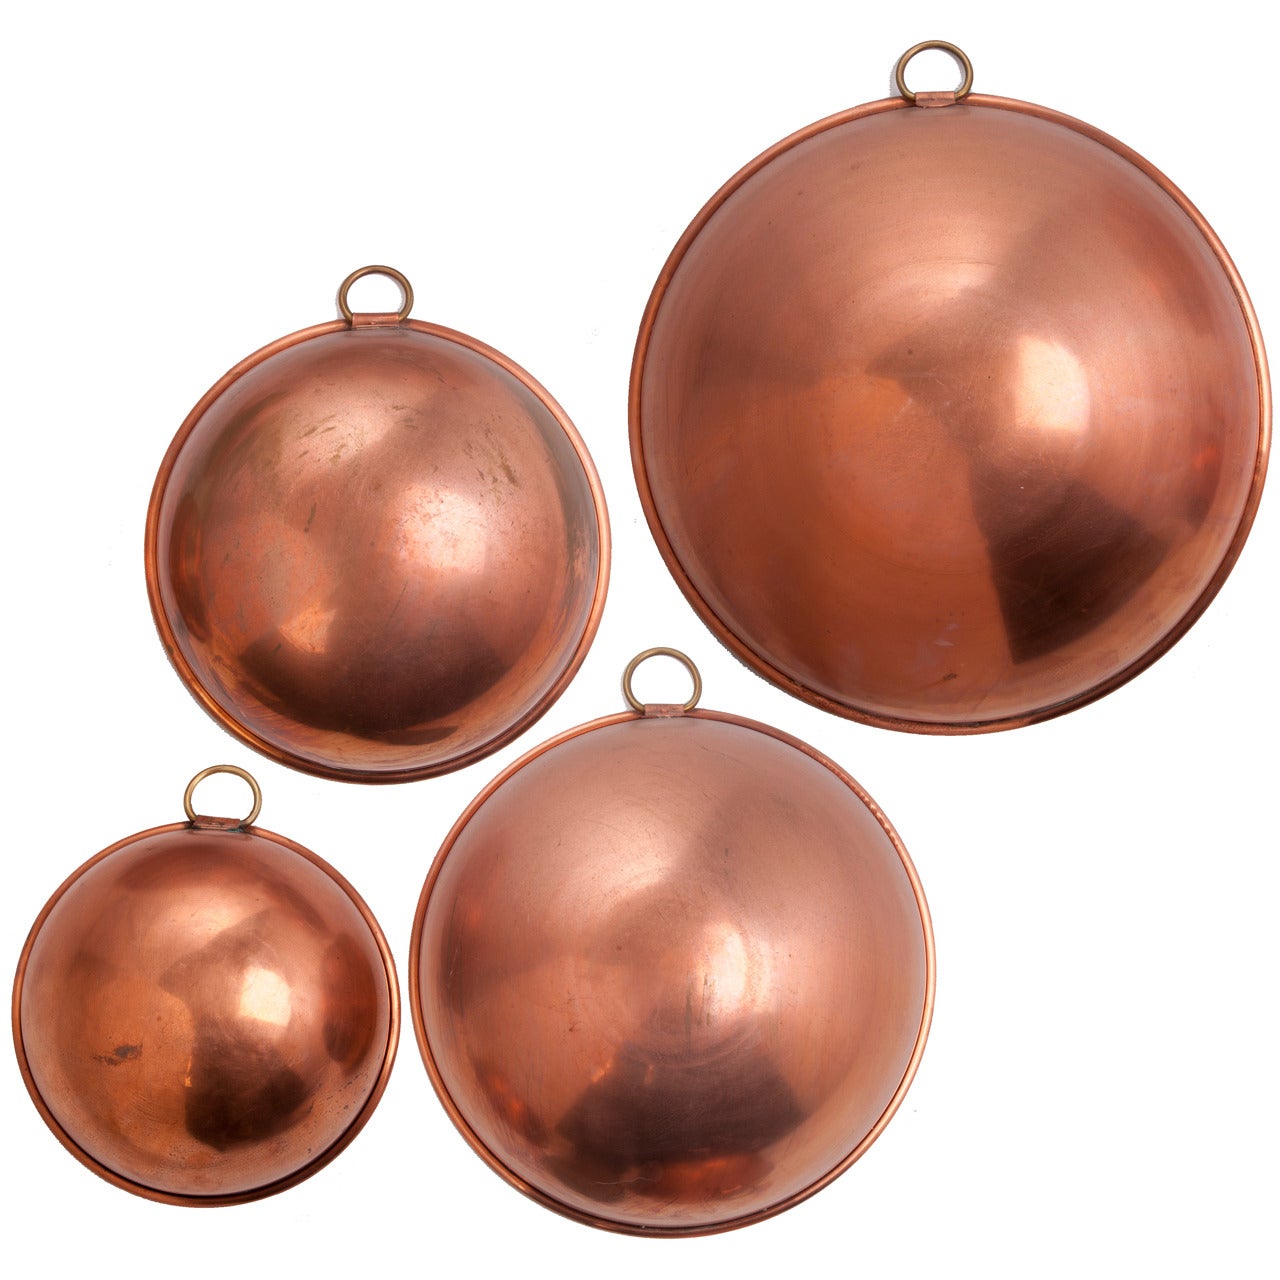 De Kulture Works™ Hand Made Copper Bowls Set Of 2-4.5X2 DH Brown Inches 